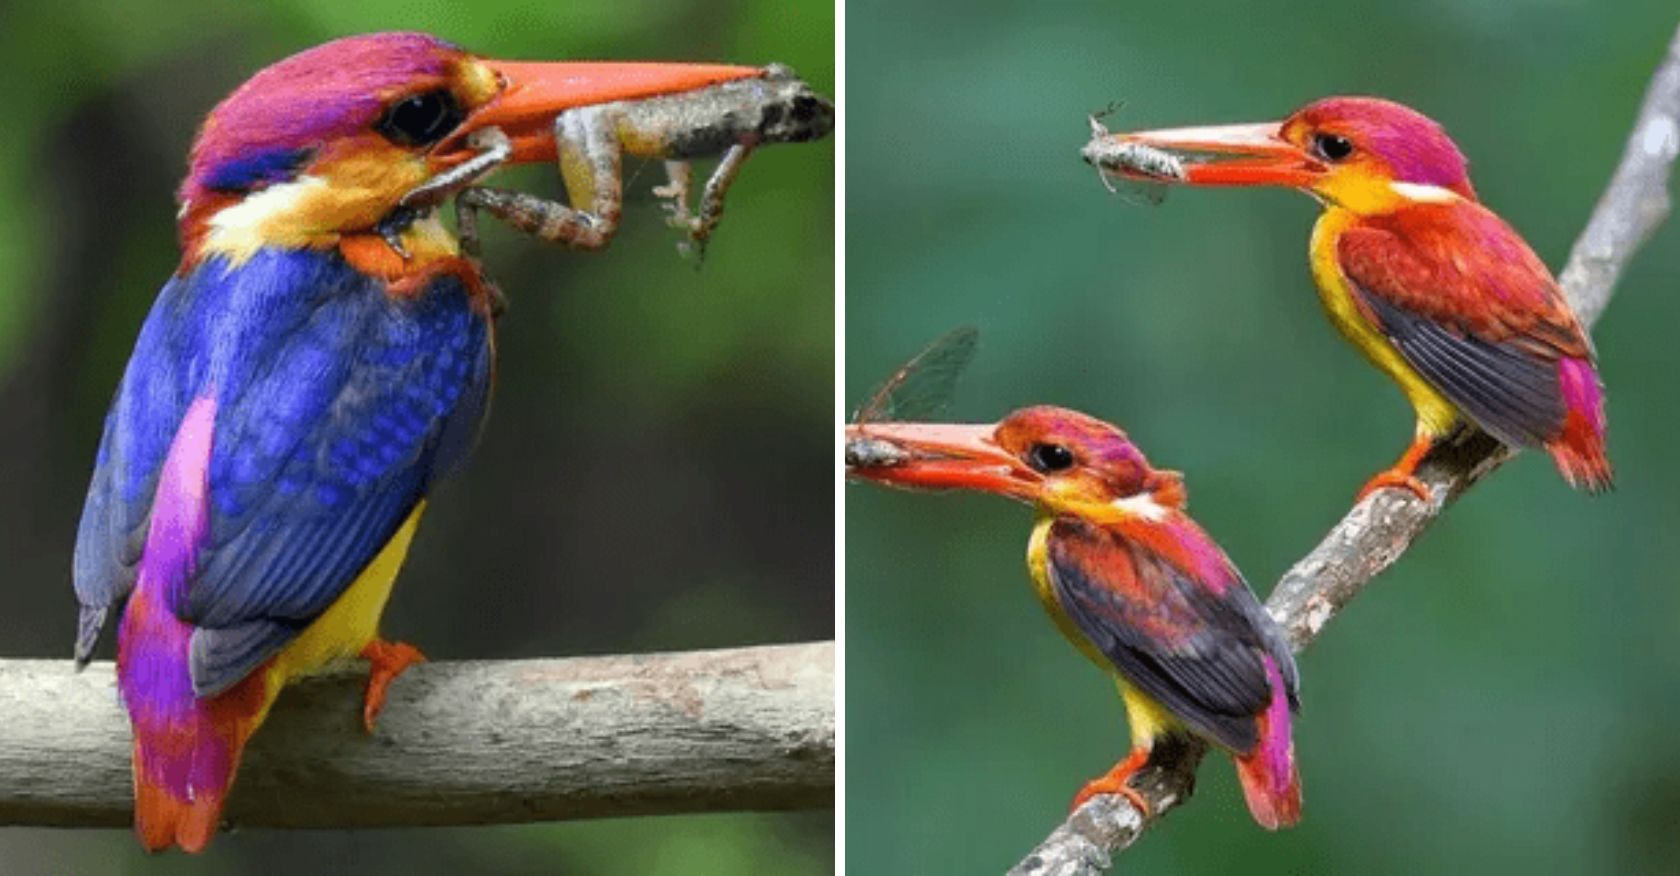 The Dwarf Kingfisher Has An Extremely Rare Color That Is Difficult To Find In The Wild